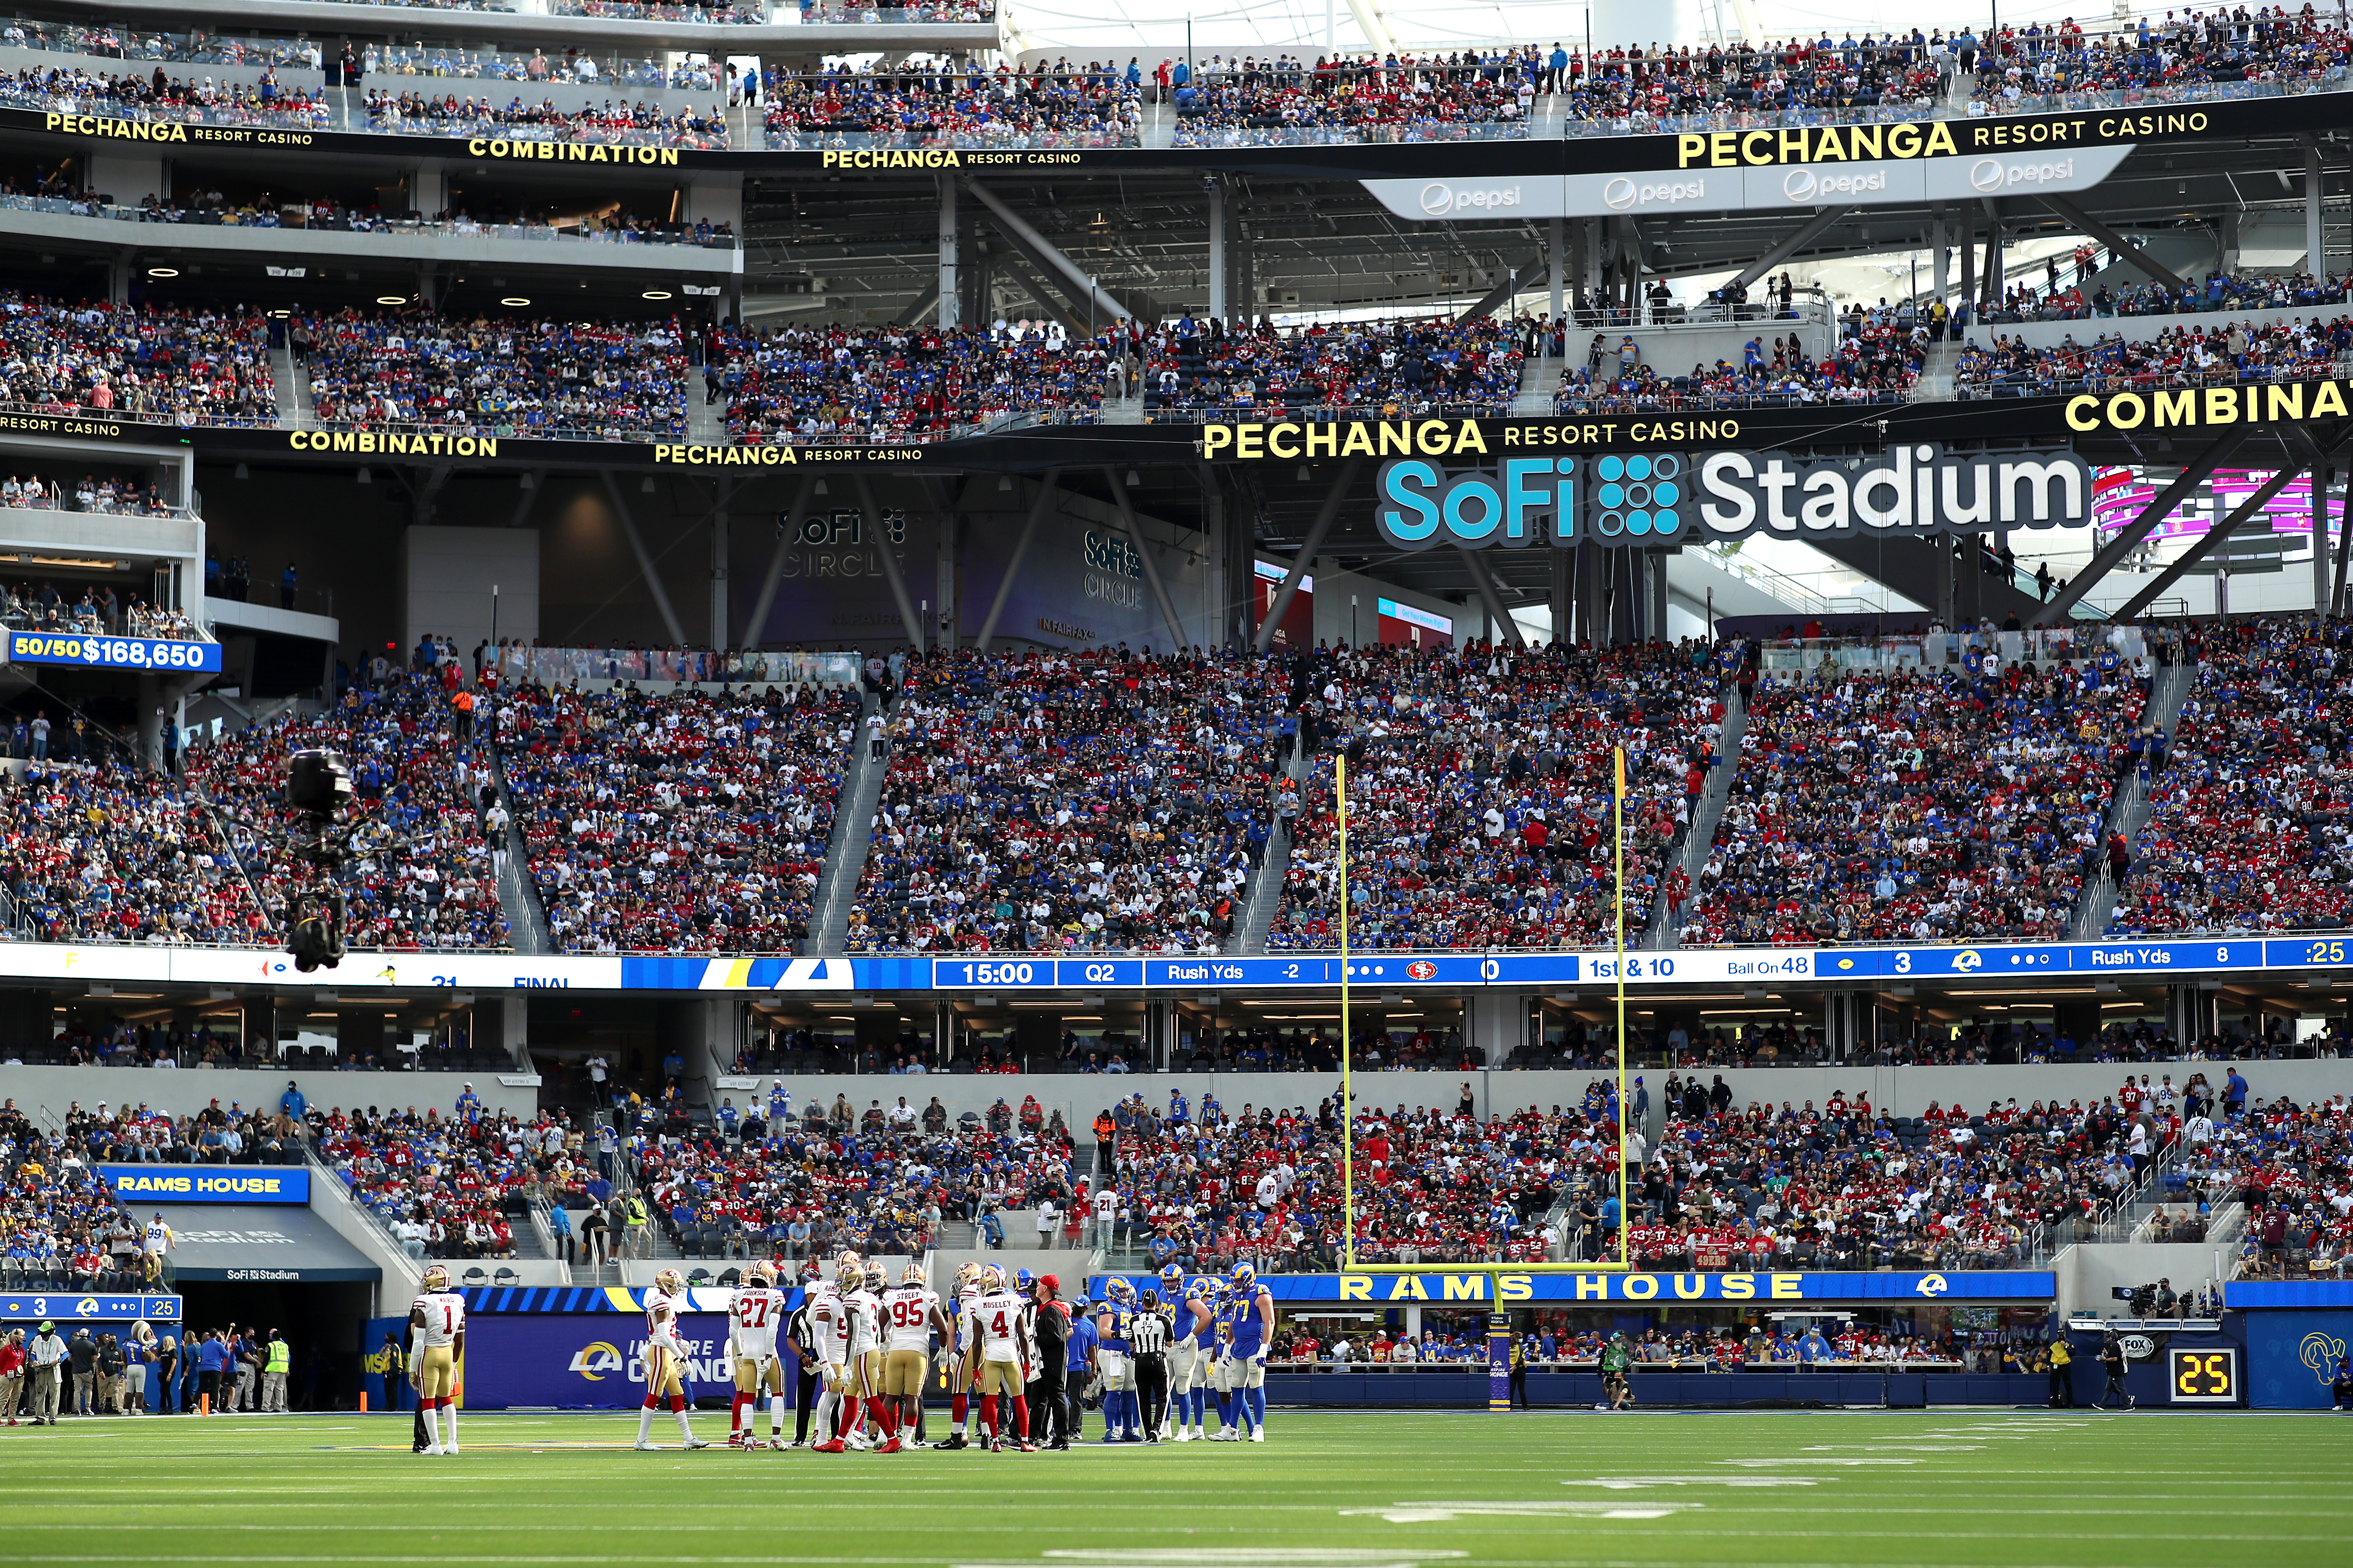 49ers vs Rams Ticket Prices Reveal Expensive Options Ahead of NFC